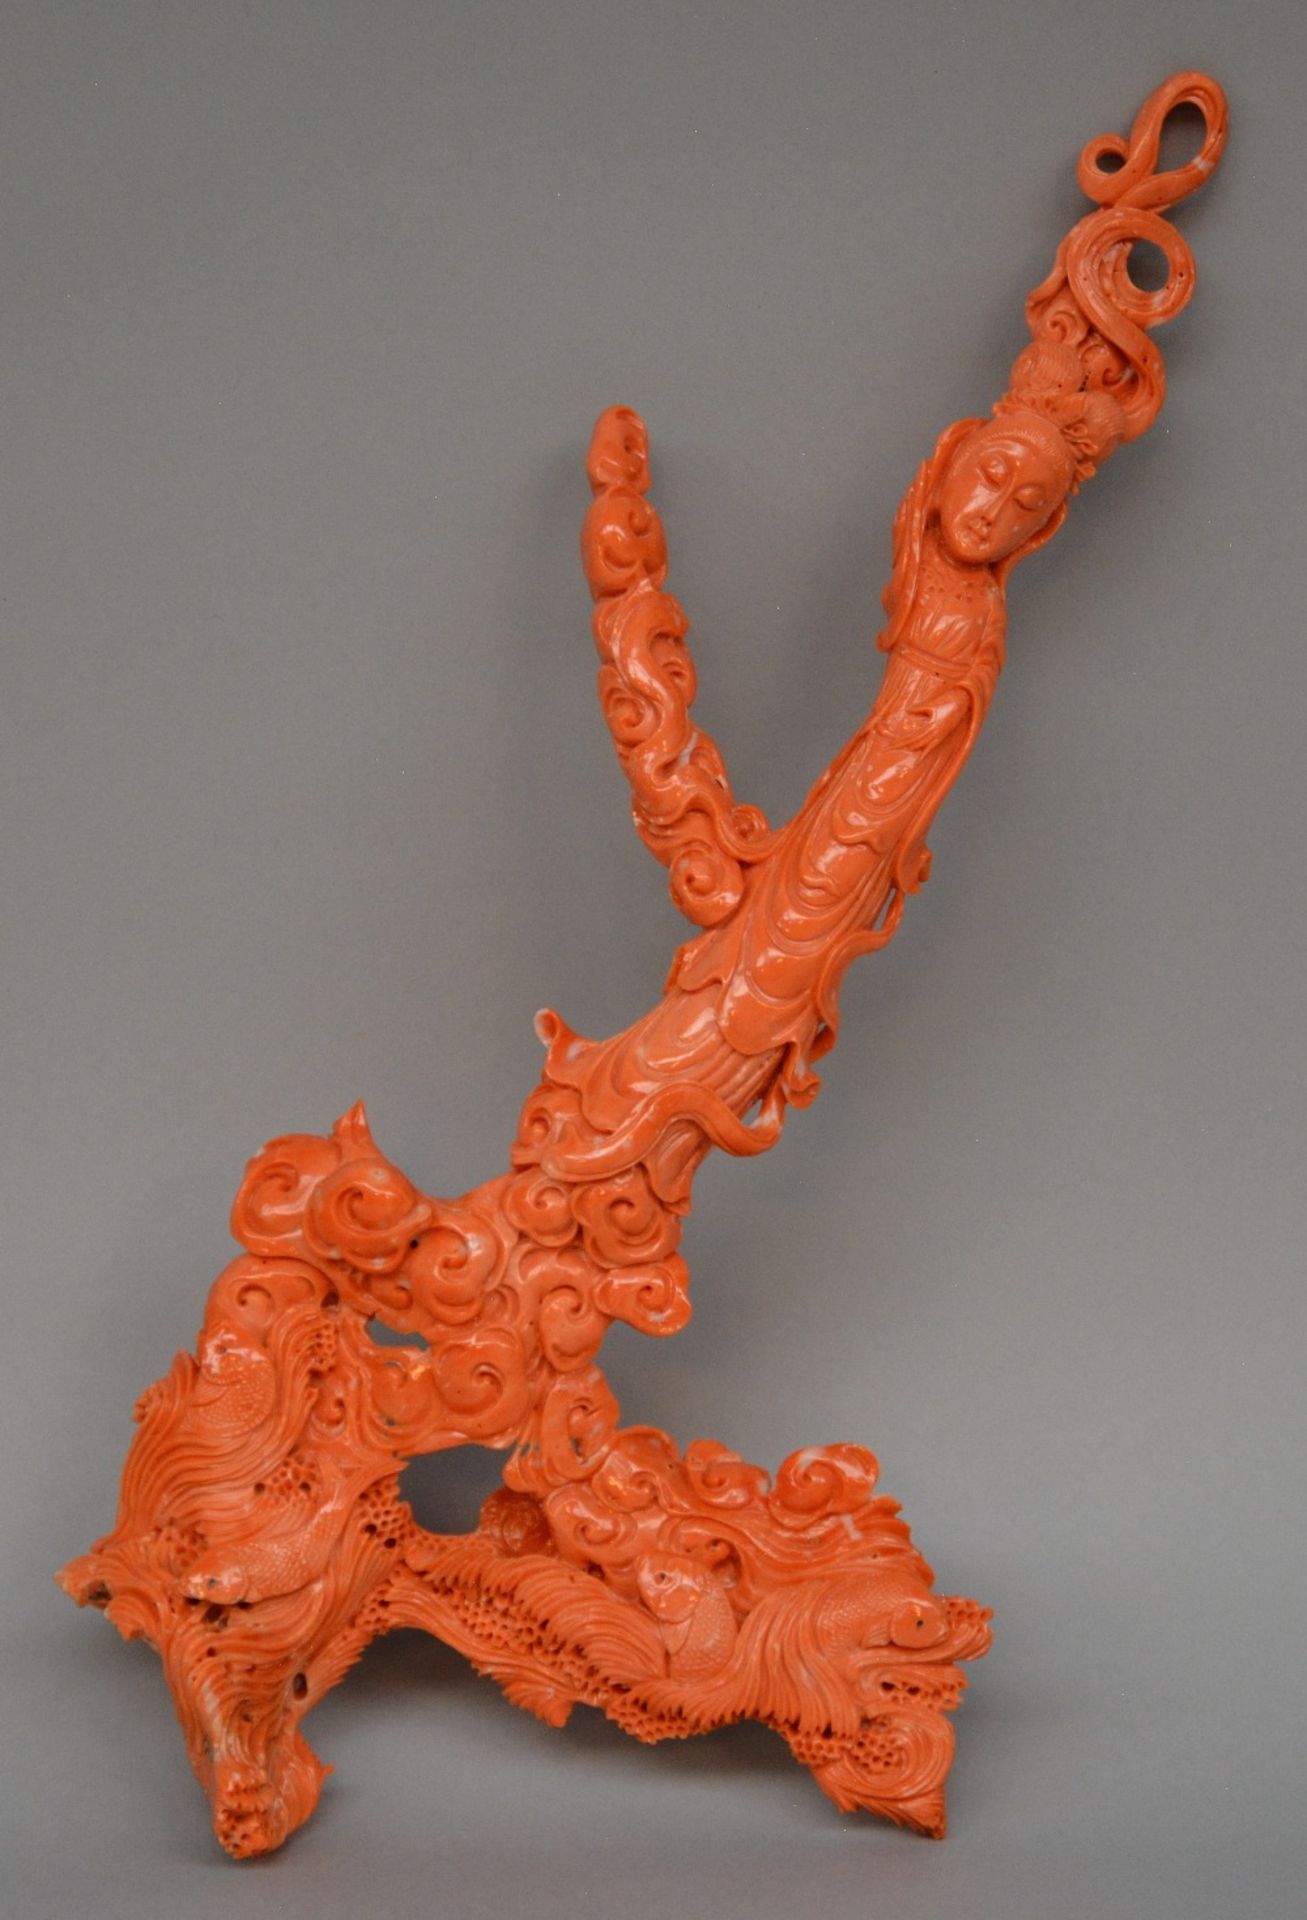 A Chinese red coral sculpture depicting a court lady and some fish, H 33 cm, Weight: about 411 g